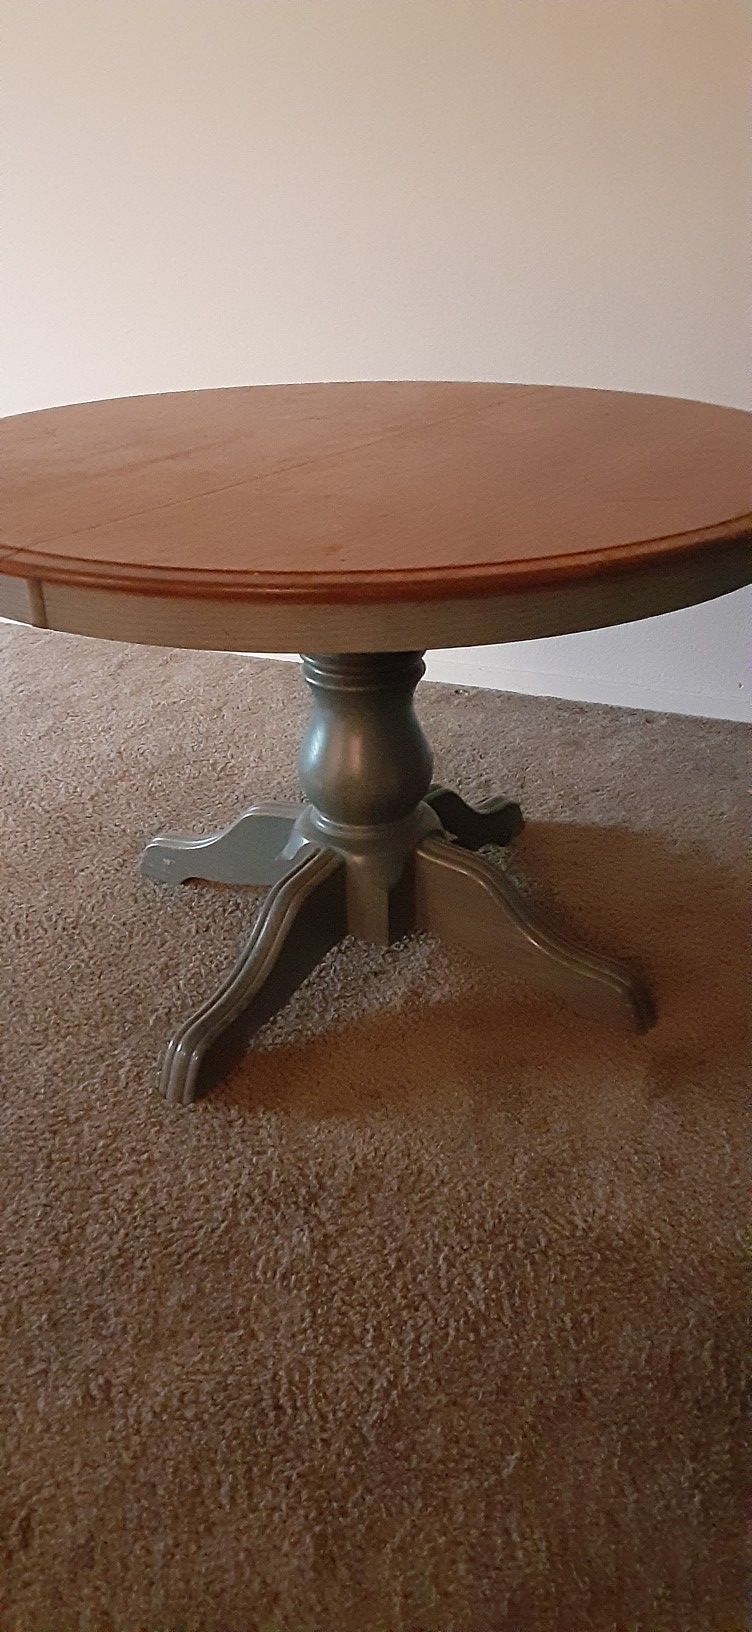 Thomasville table extandable +4 chairs